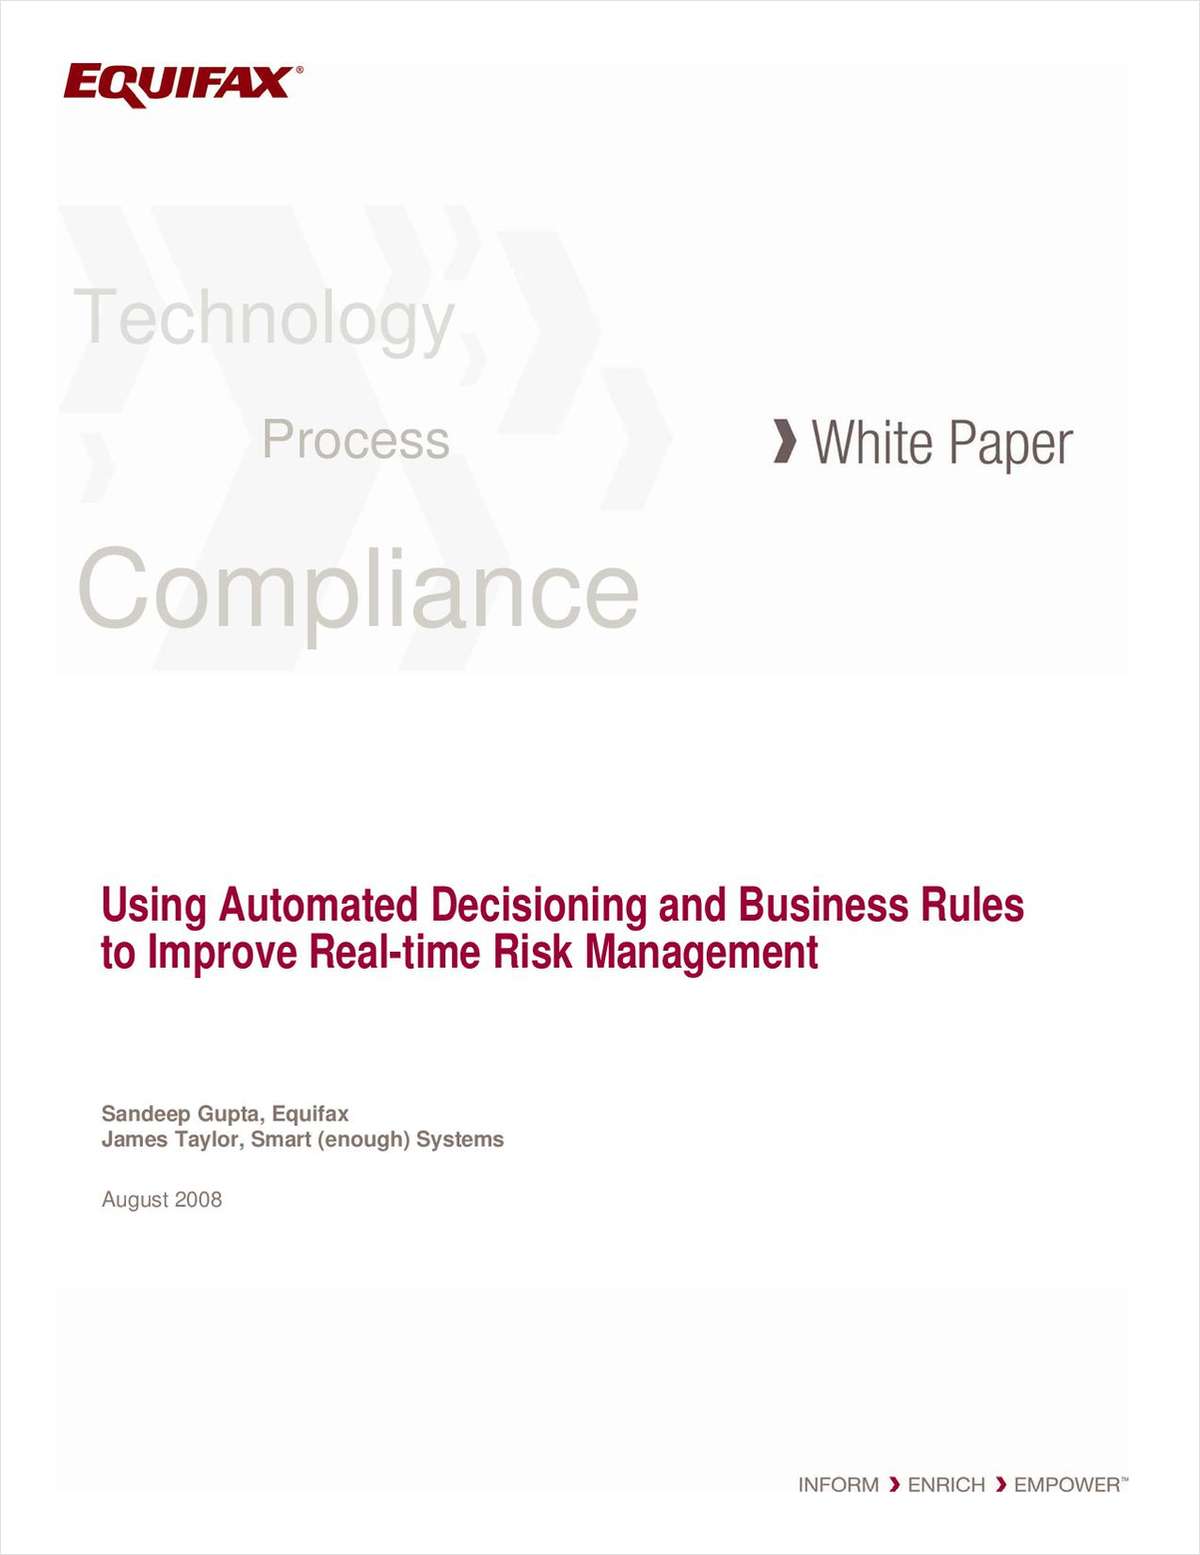 Using Automated Decisioning and Business to Improve Real-time Risk Management